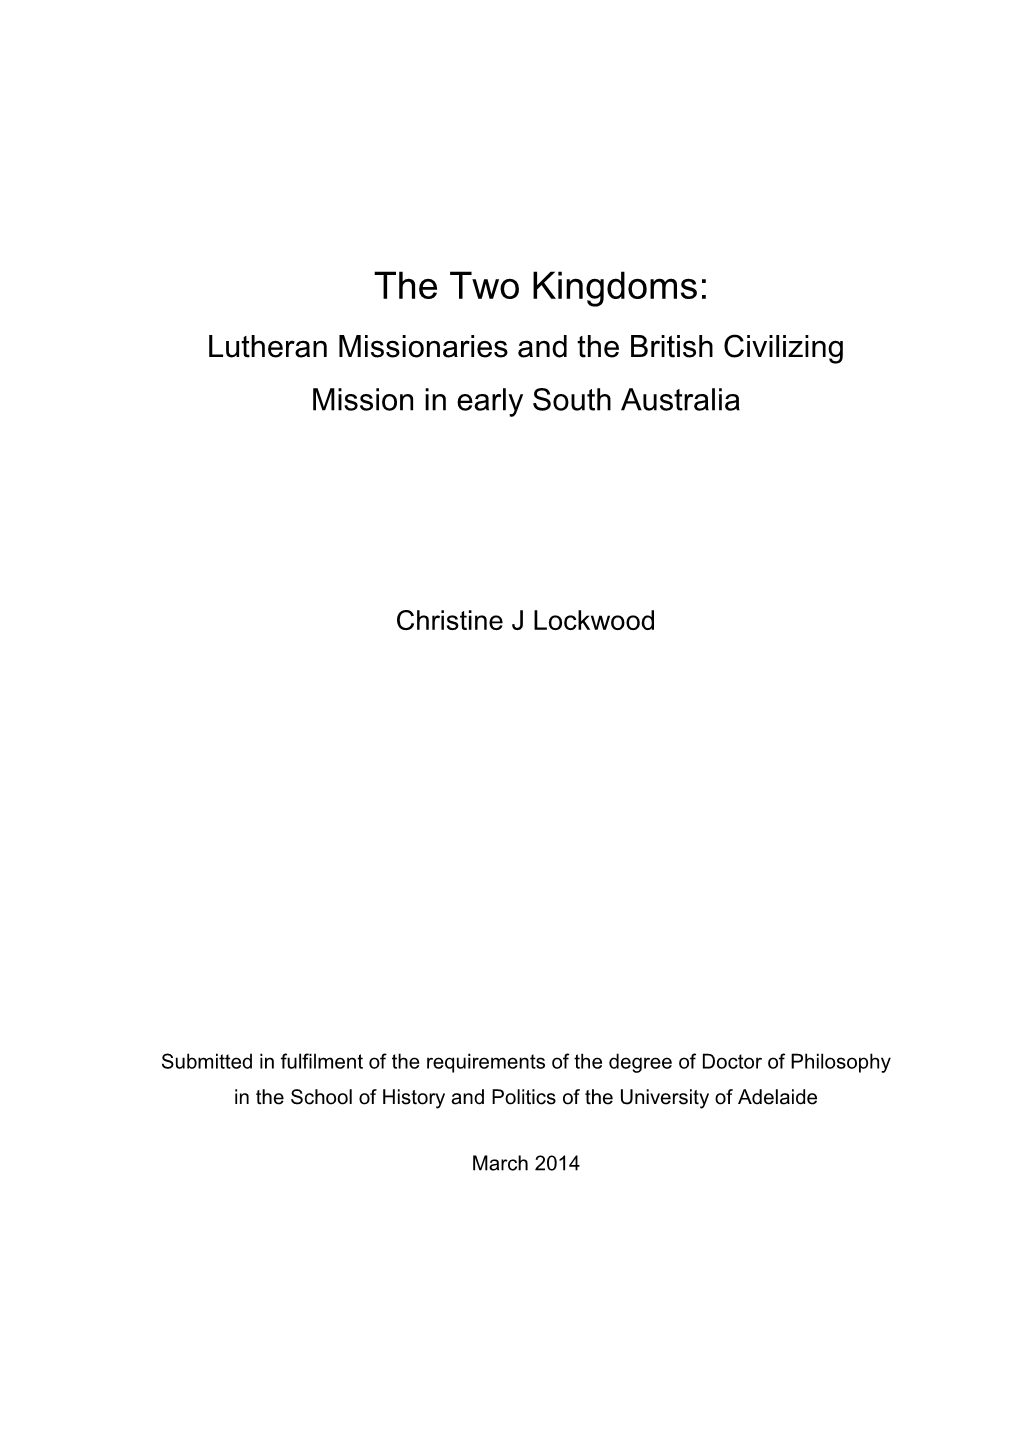 Lutheran Missionaries and the British Civilizing Mission in Early South Australia